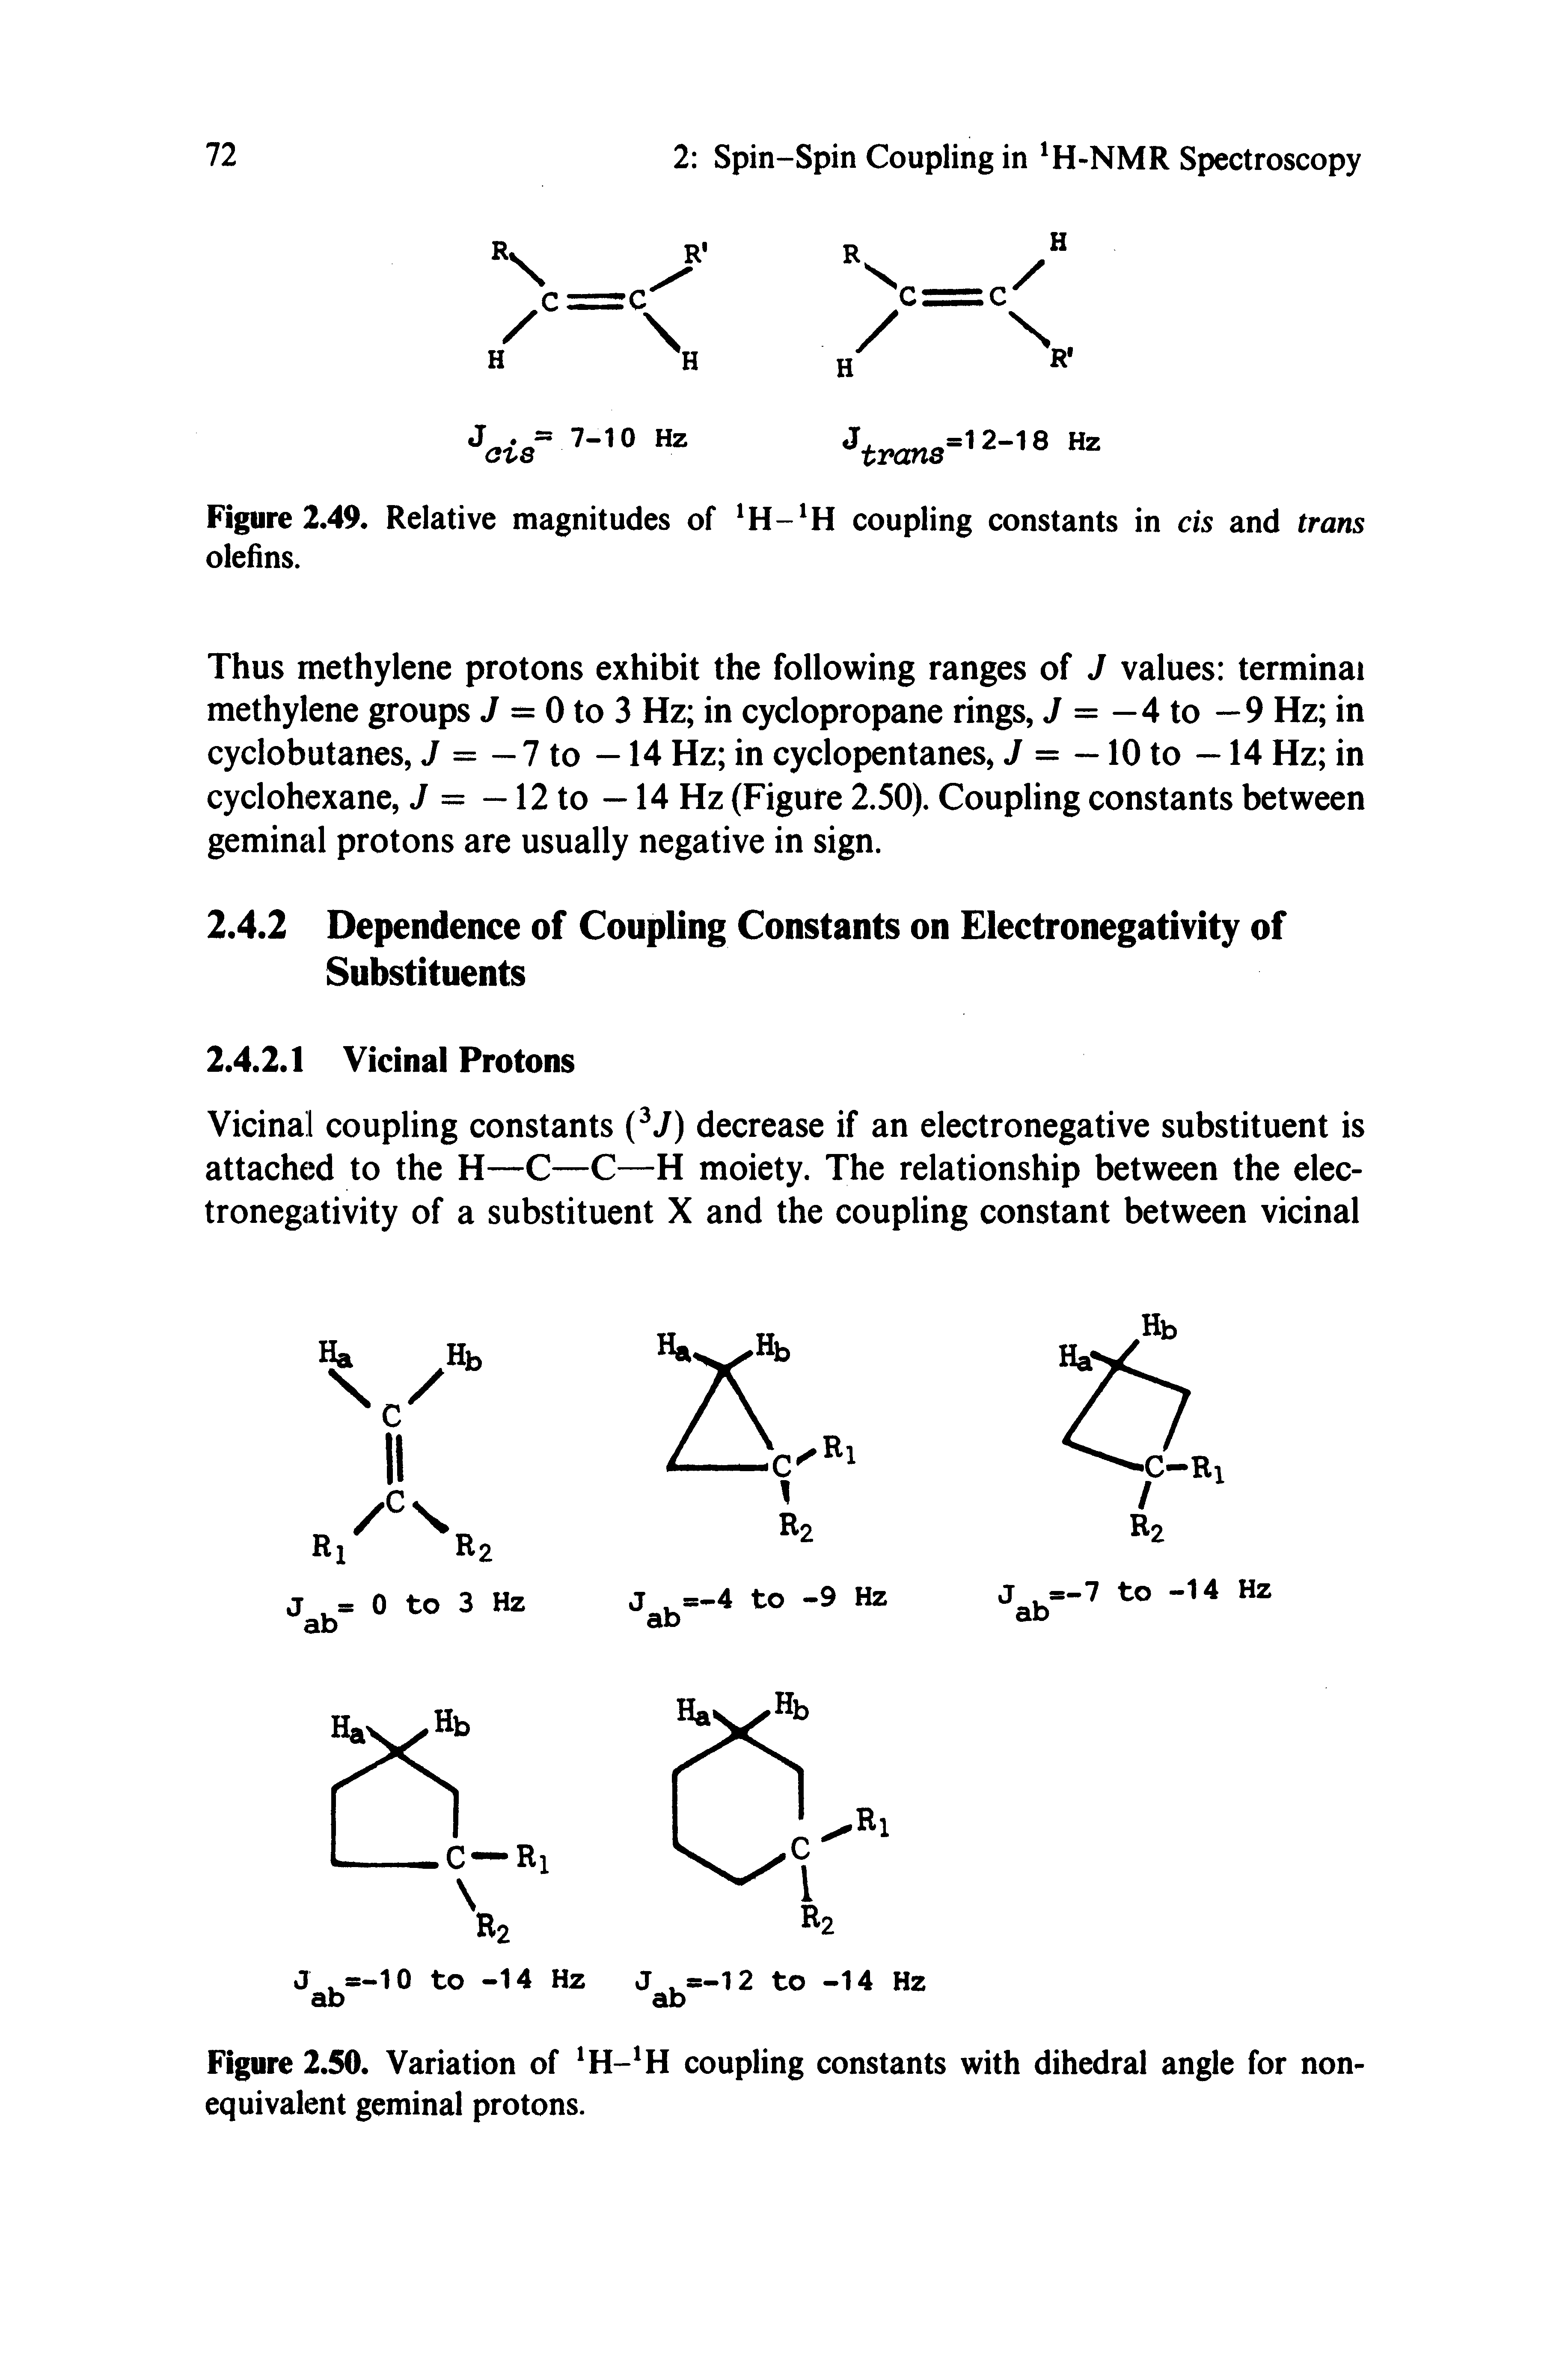 Figure 2.50. Variation of coupling constants with dihedral angle for non-...